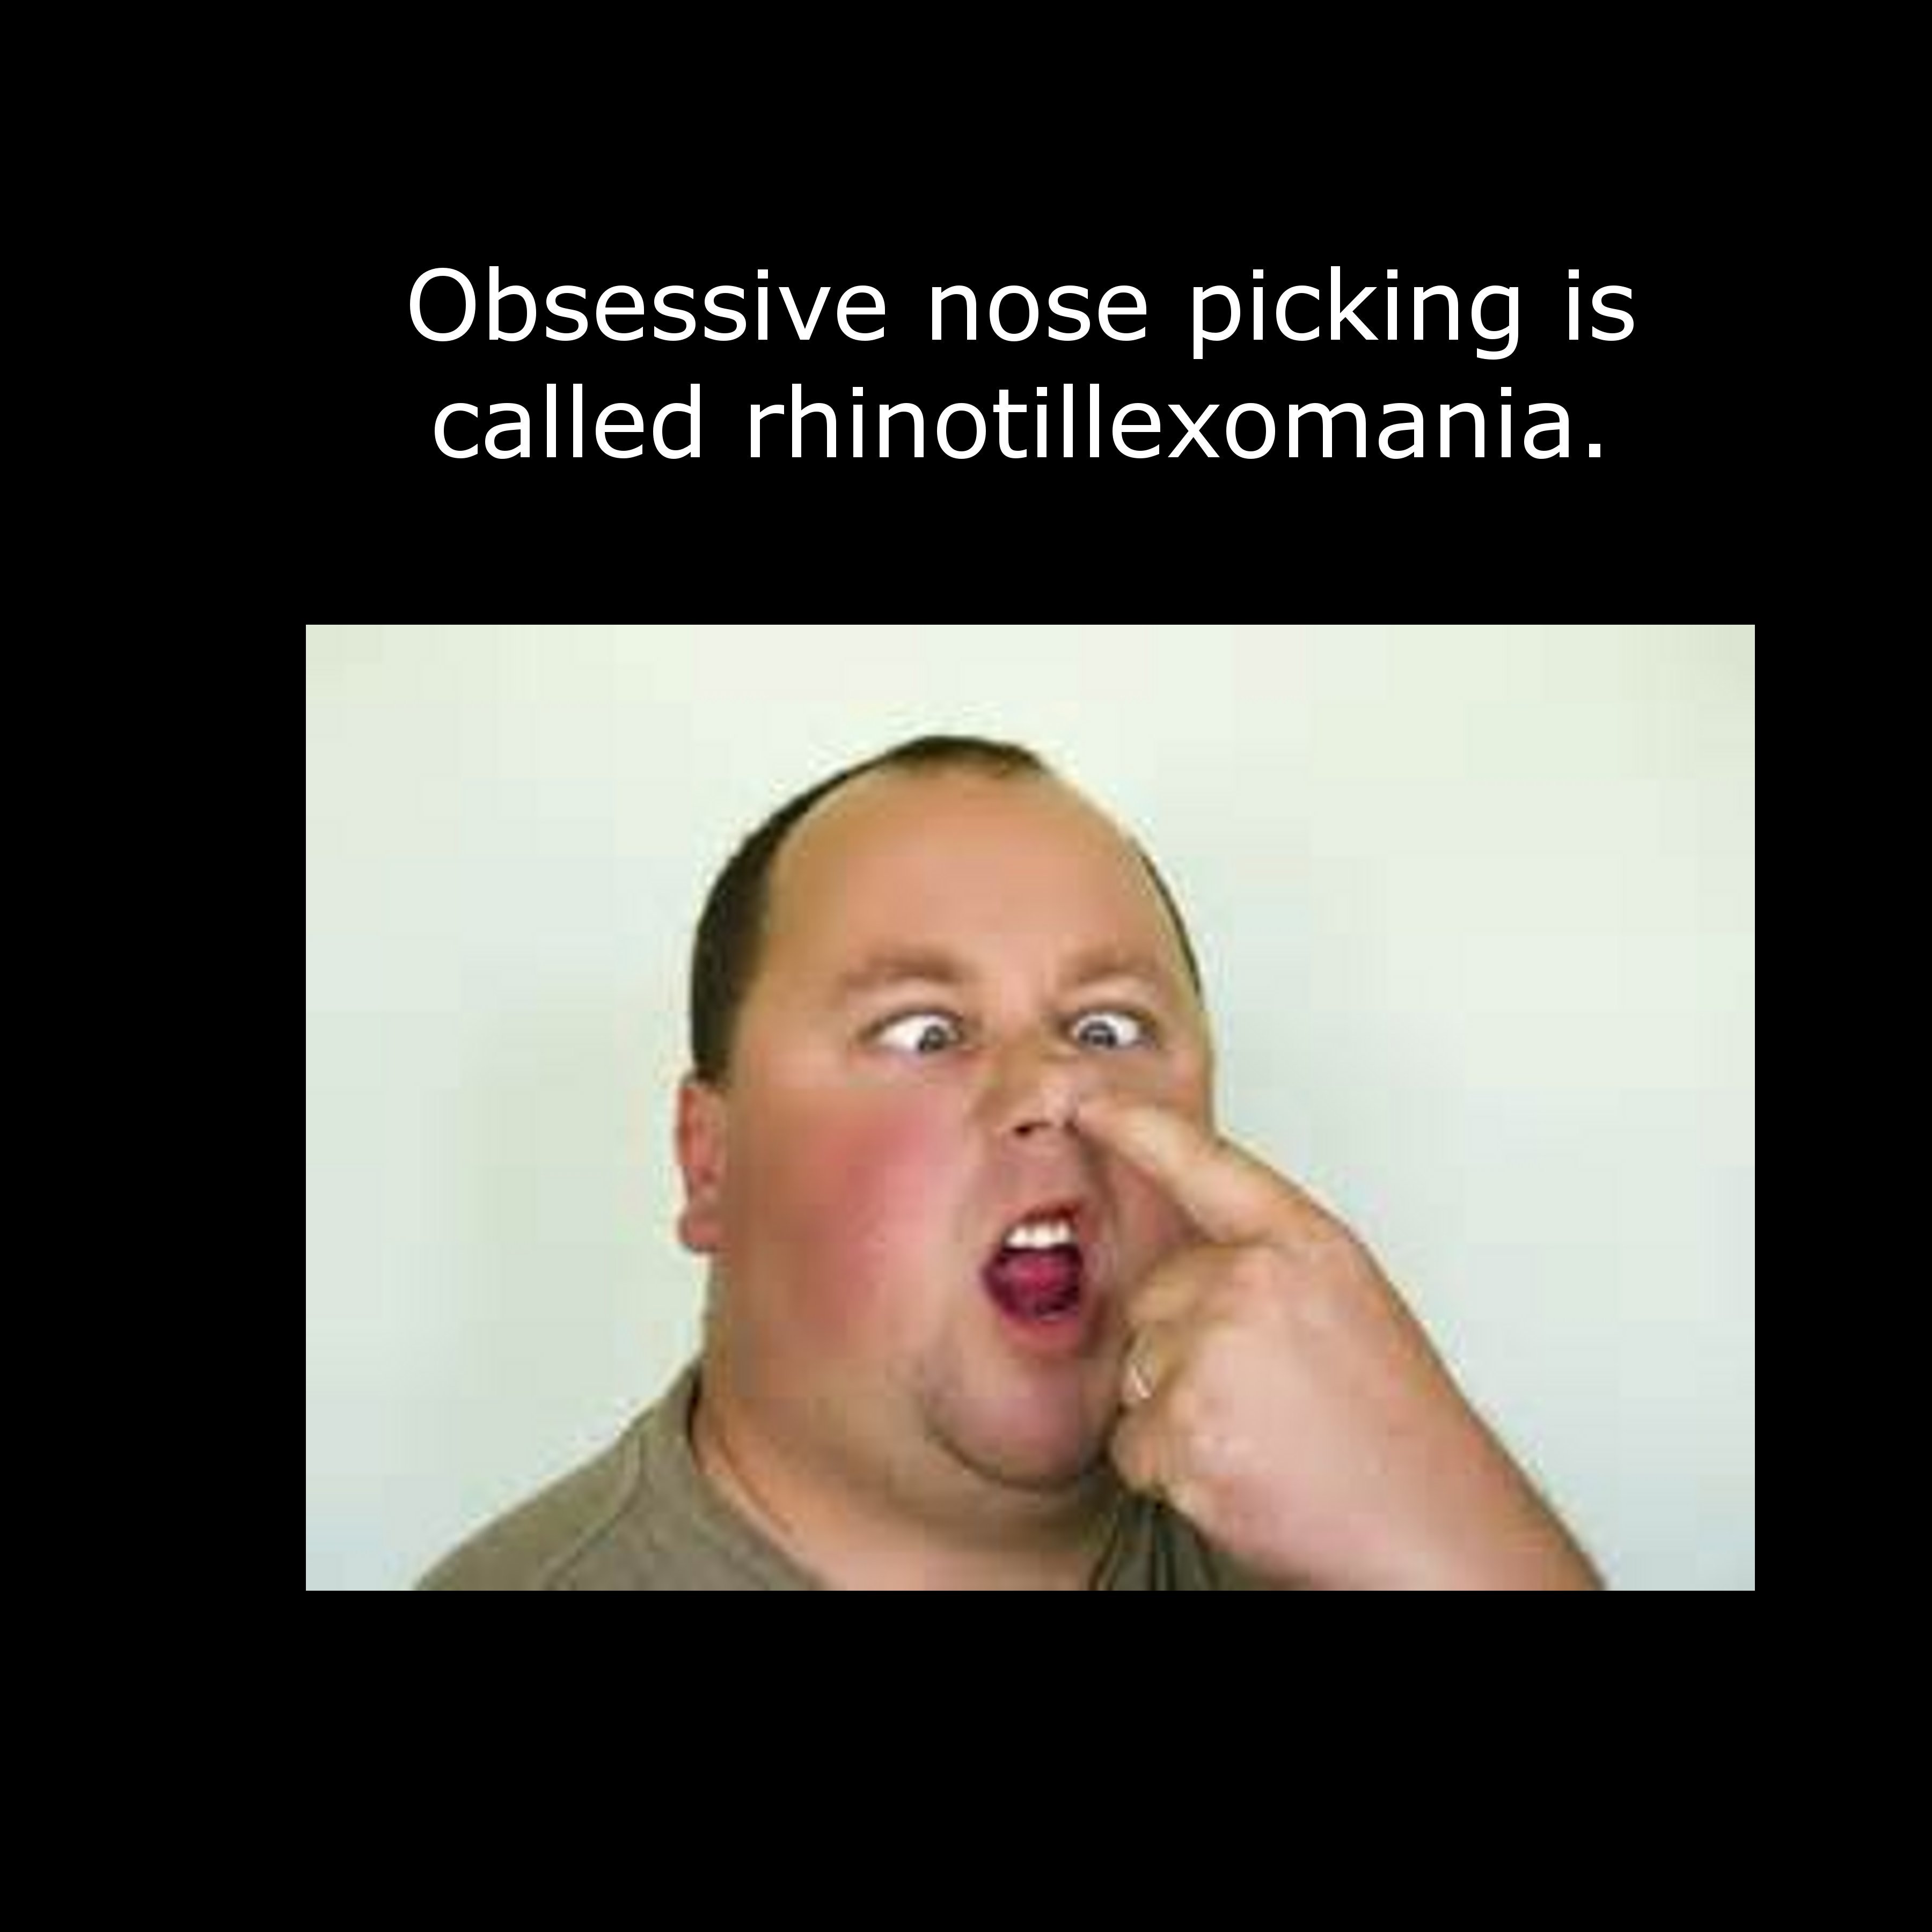 guy picking nose - Obsessive nose picking is called rhinotillexomania.